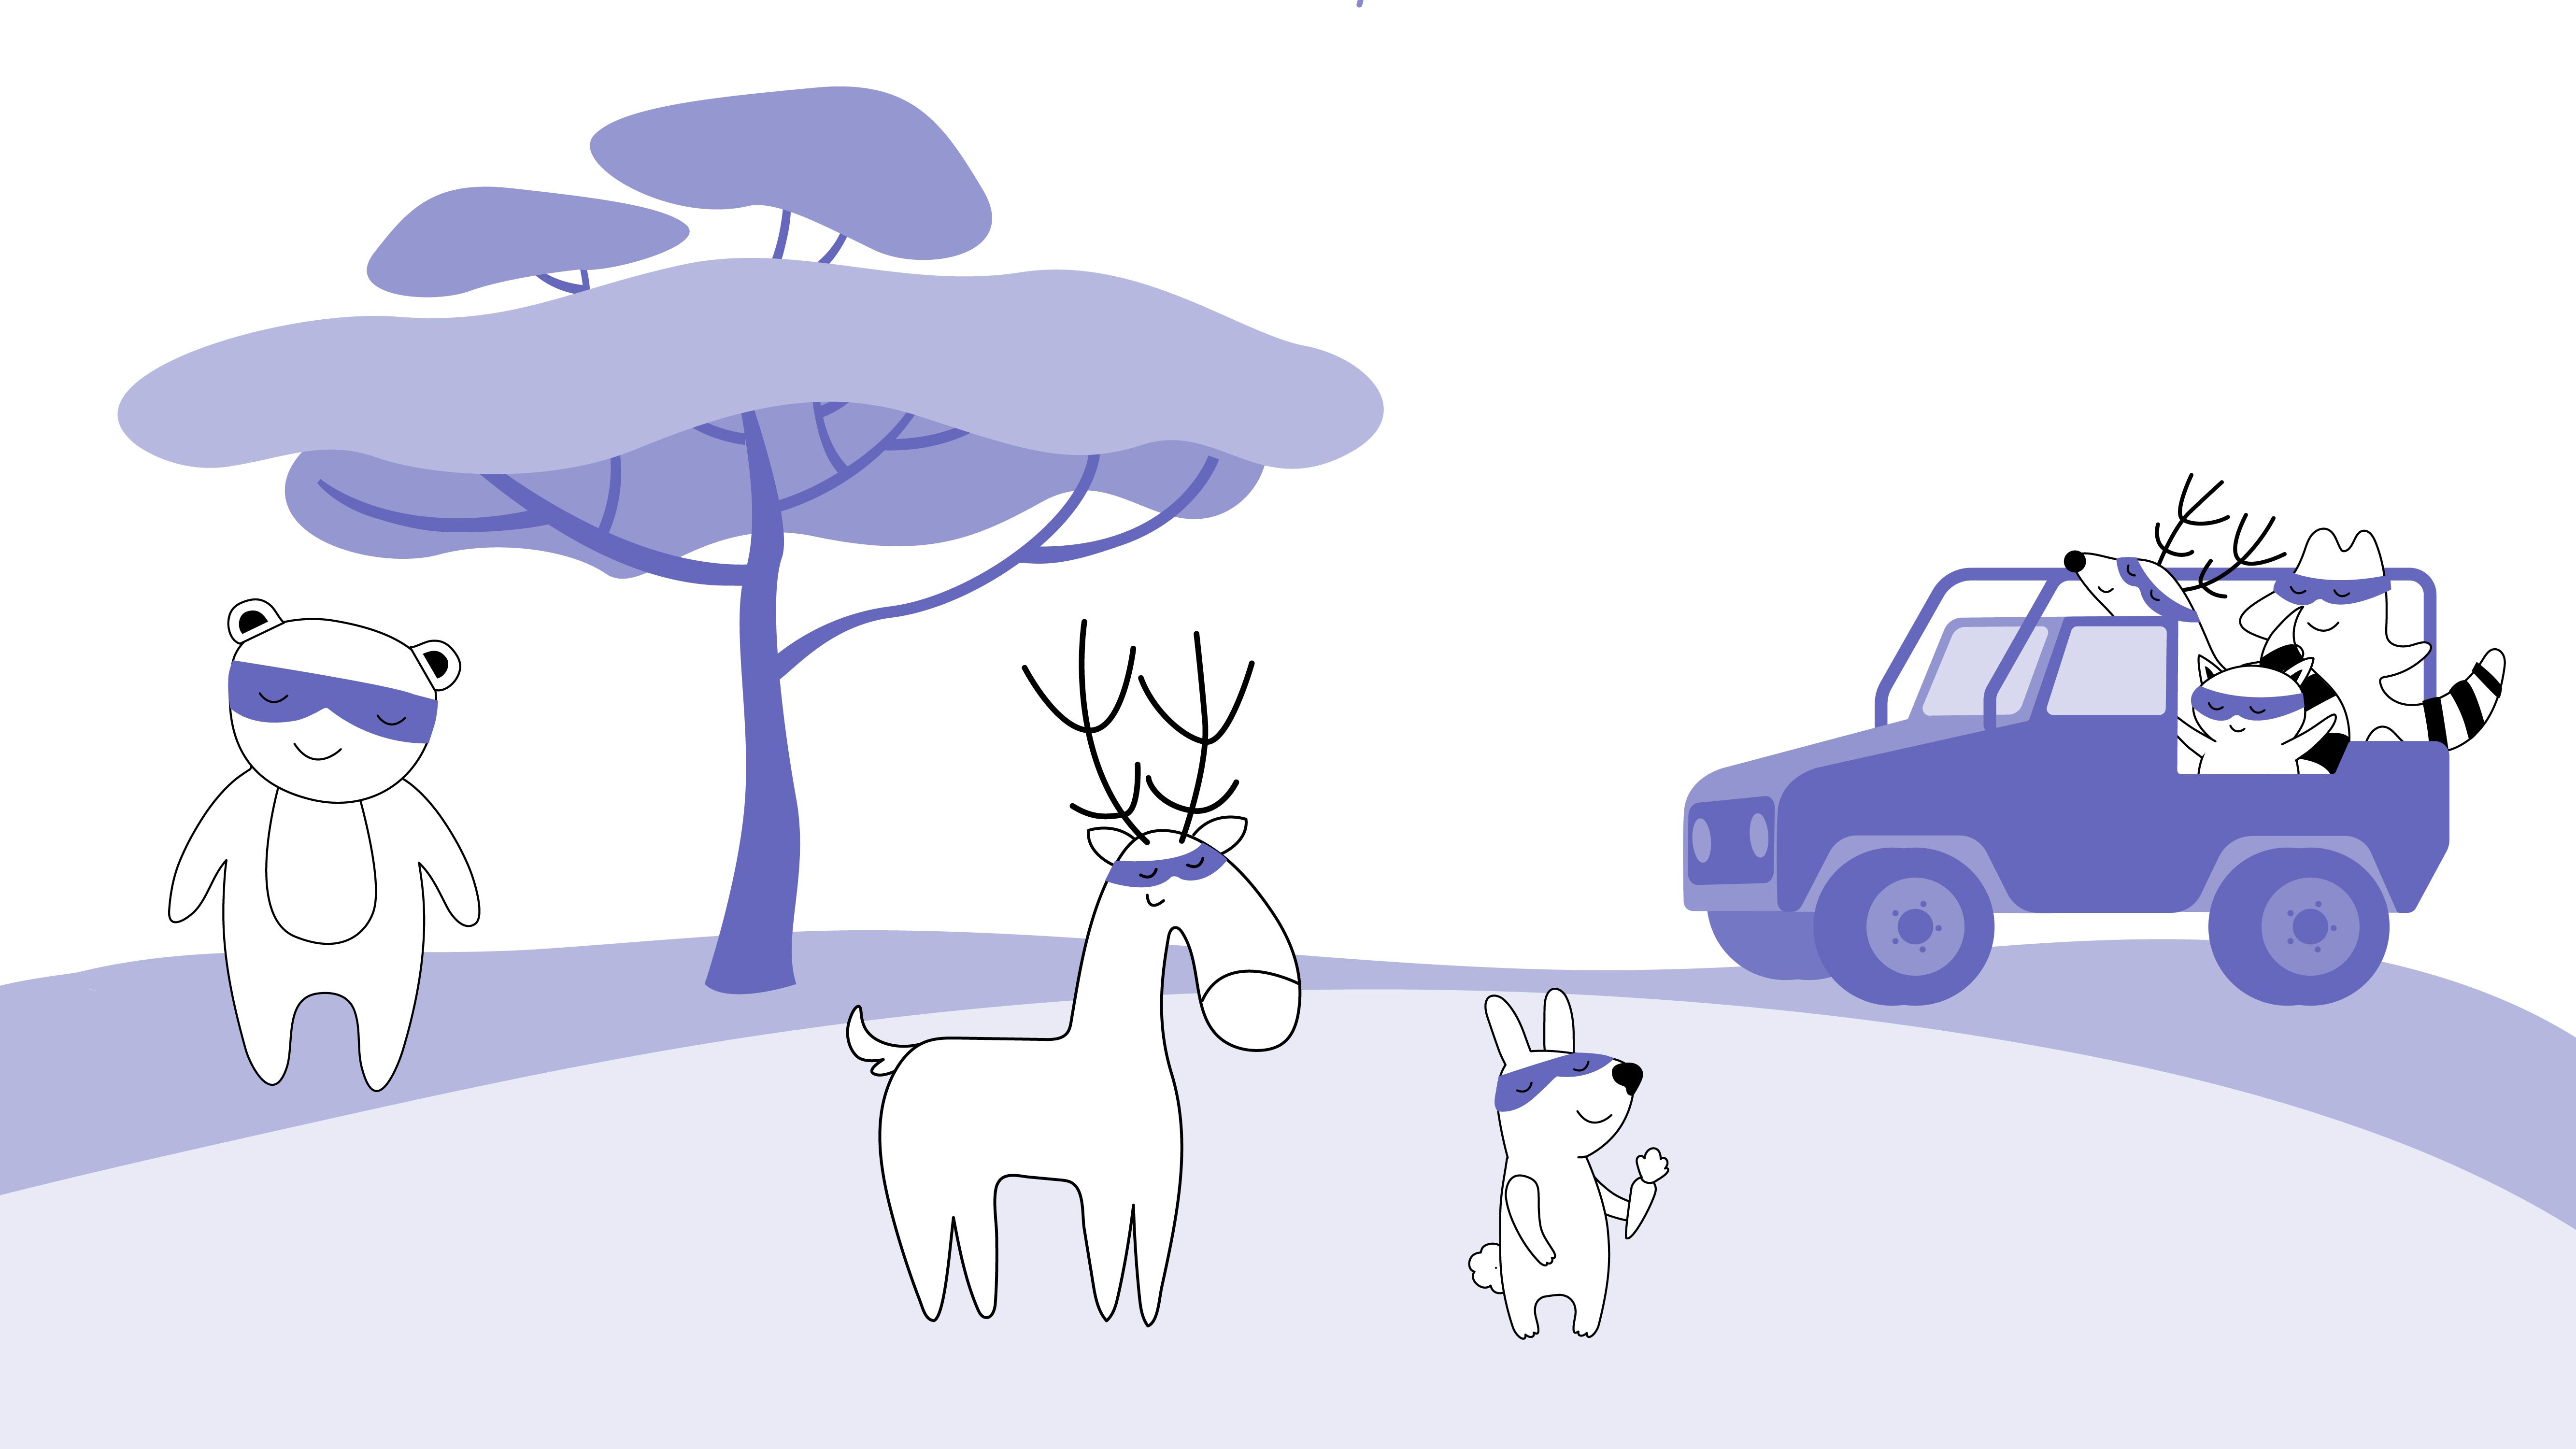 Soren, Iggy, and Benji are driving in a car through the forest, seeing a bear, a deer, and a bunny.